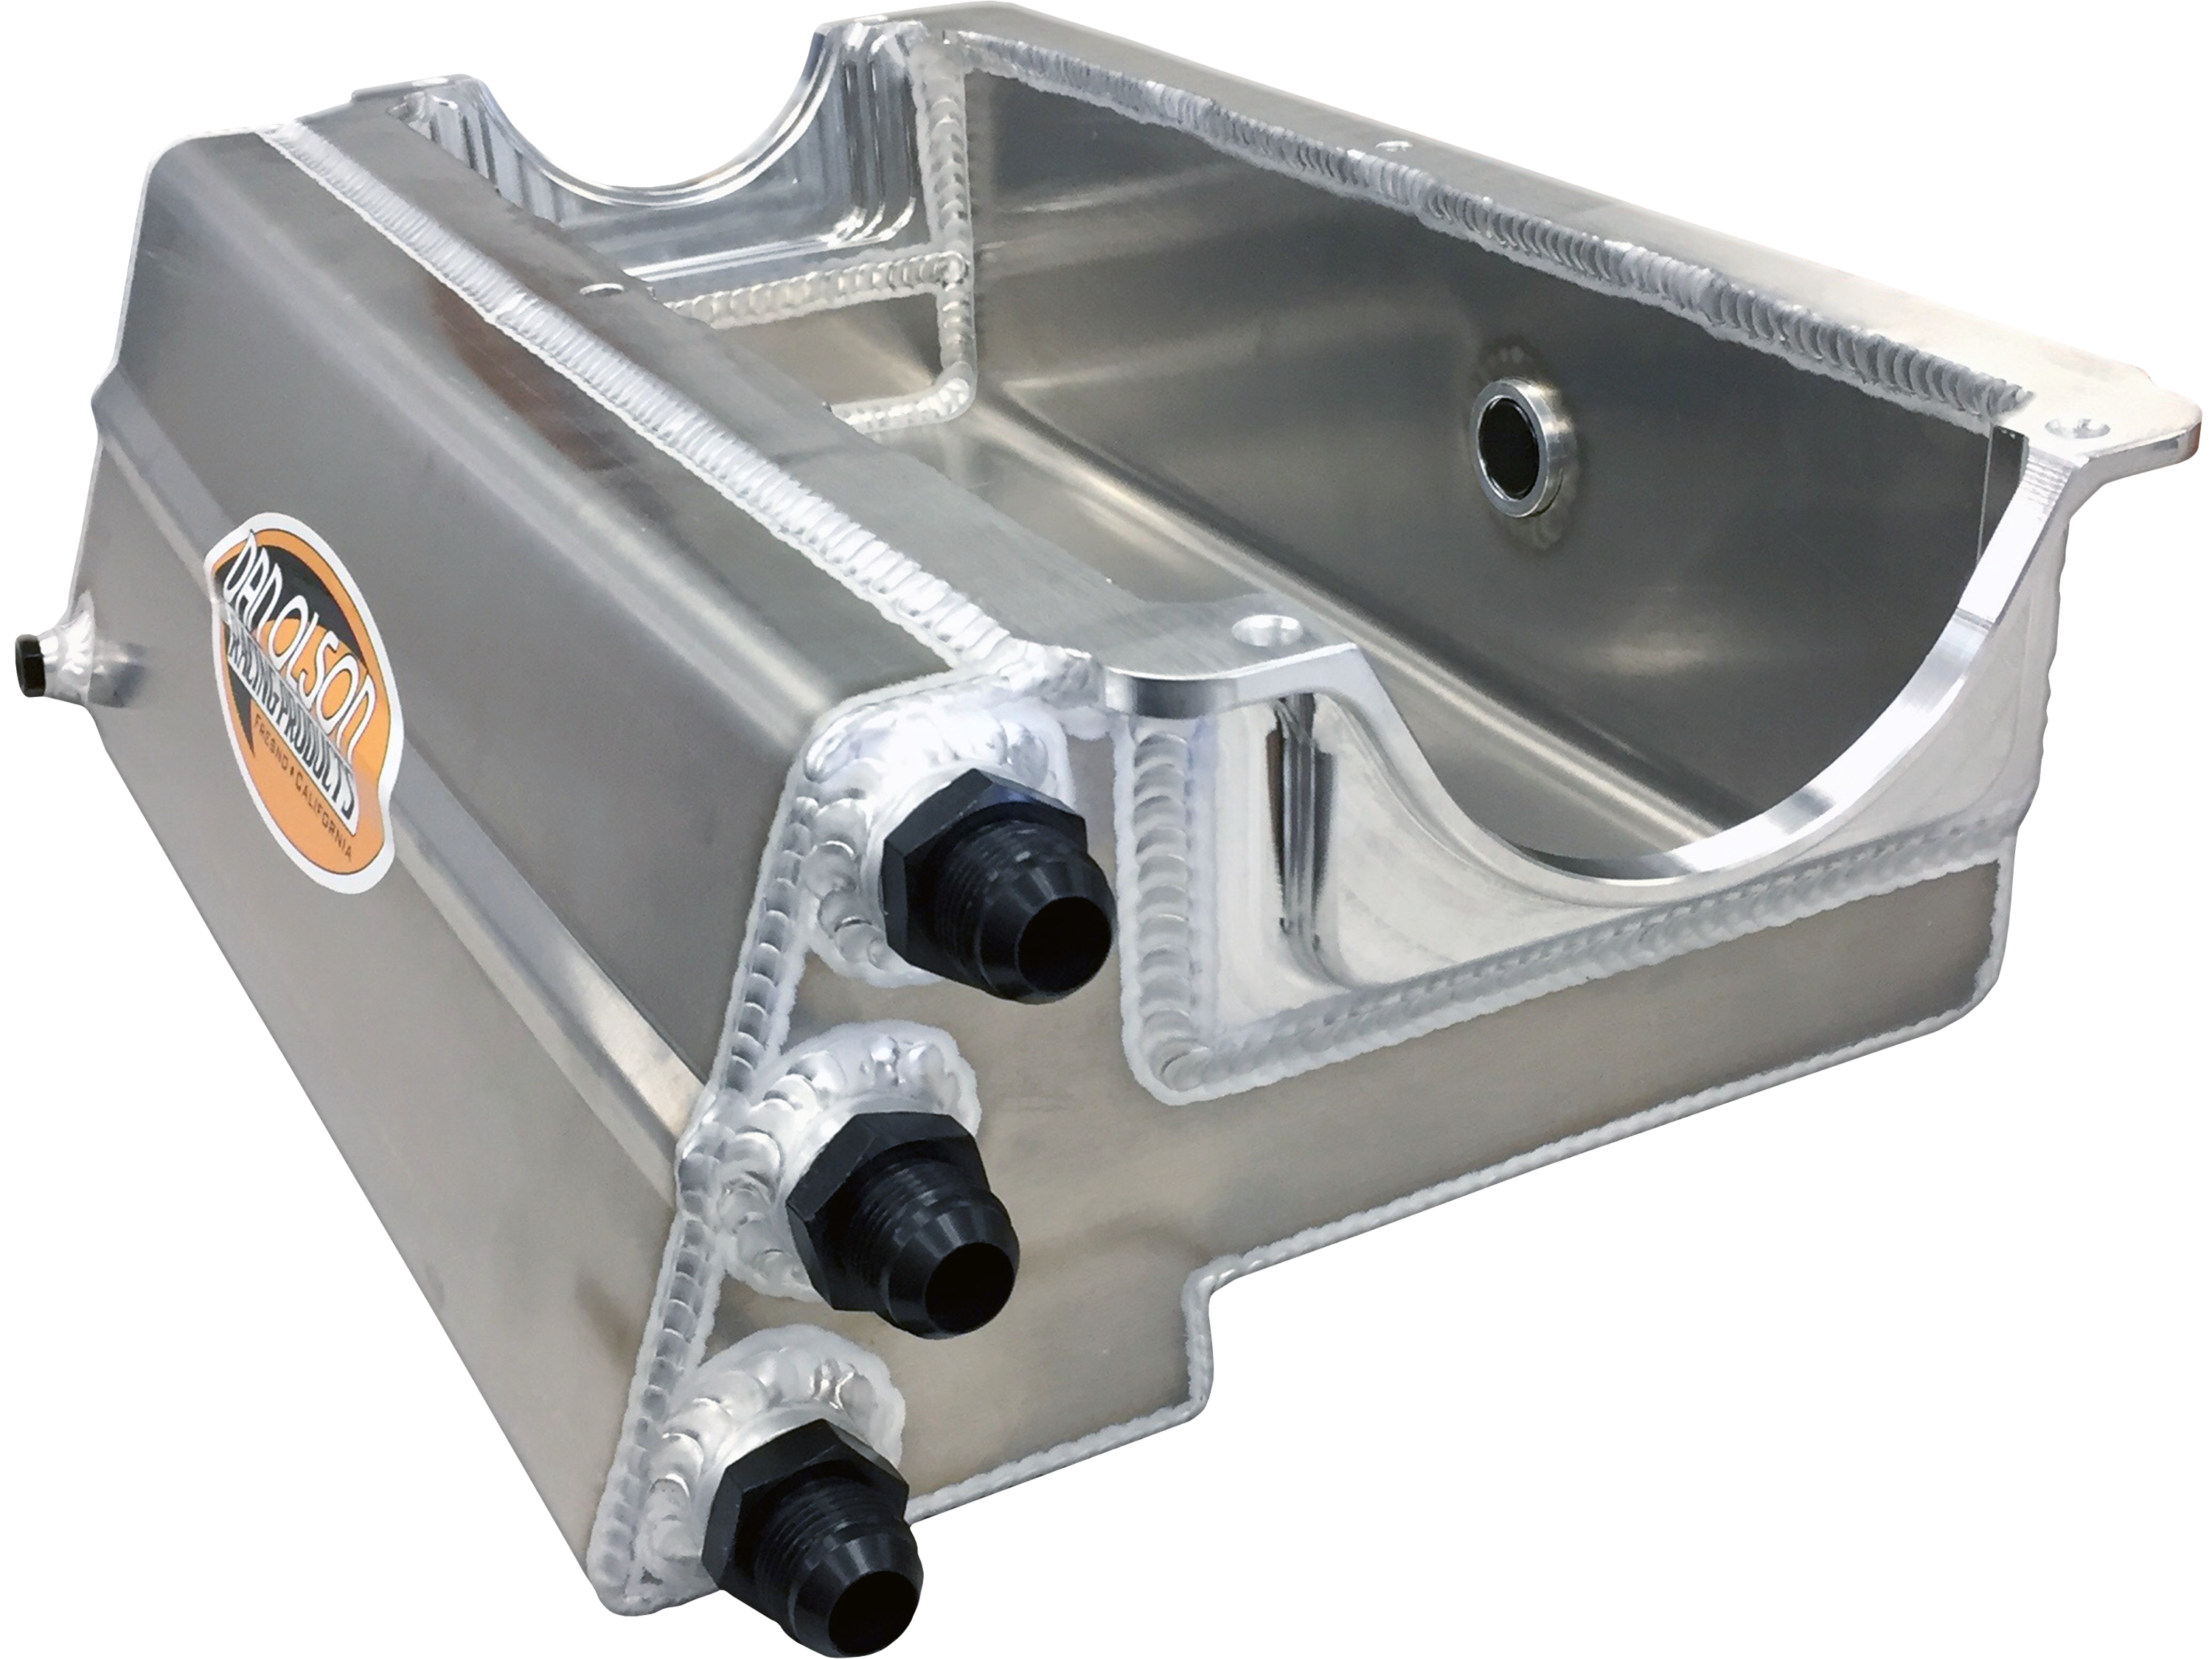 SPE Spectre Performance 4989 Aluminum Oil Pan for Small Block Chevy